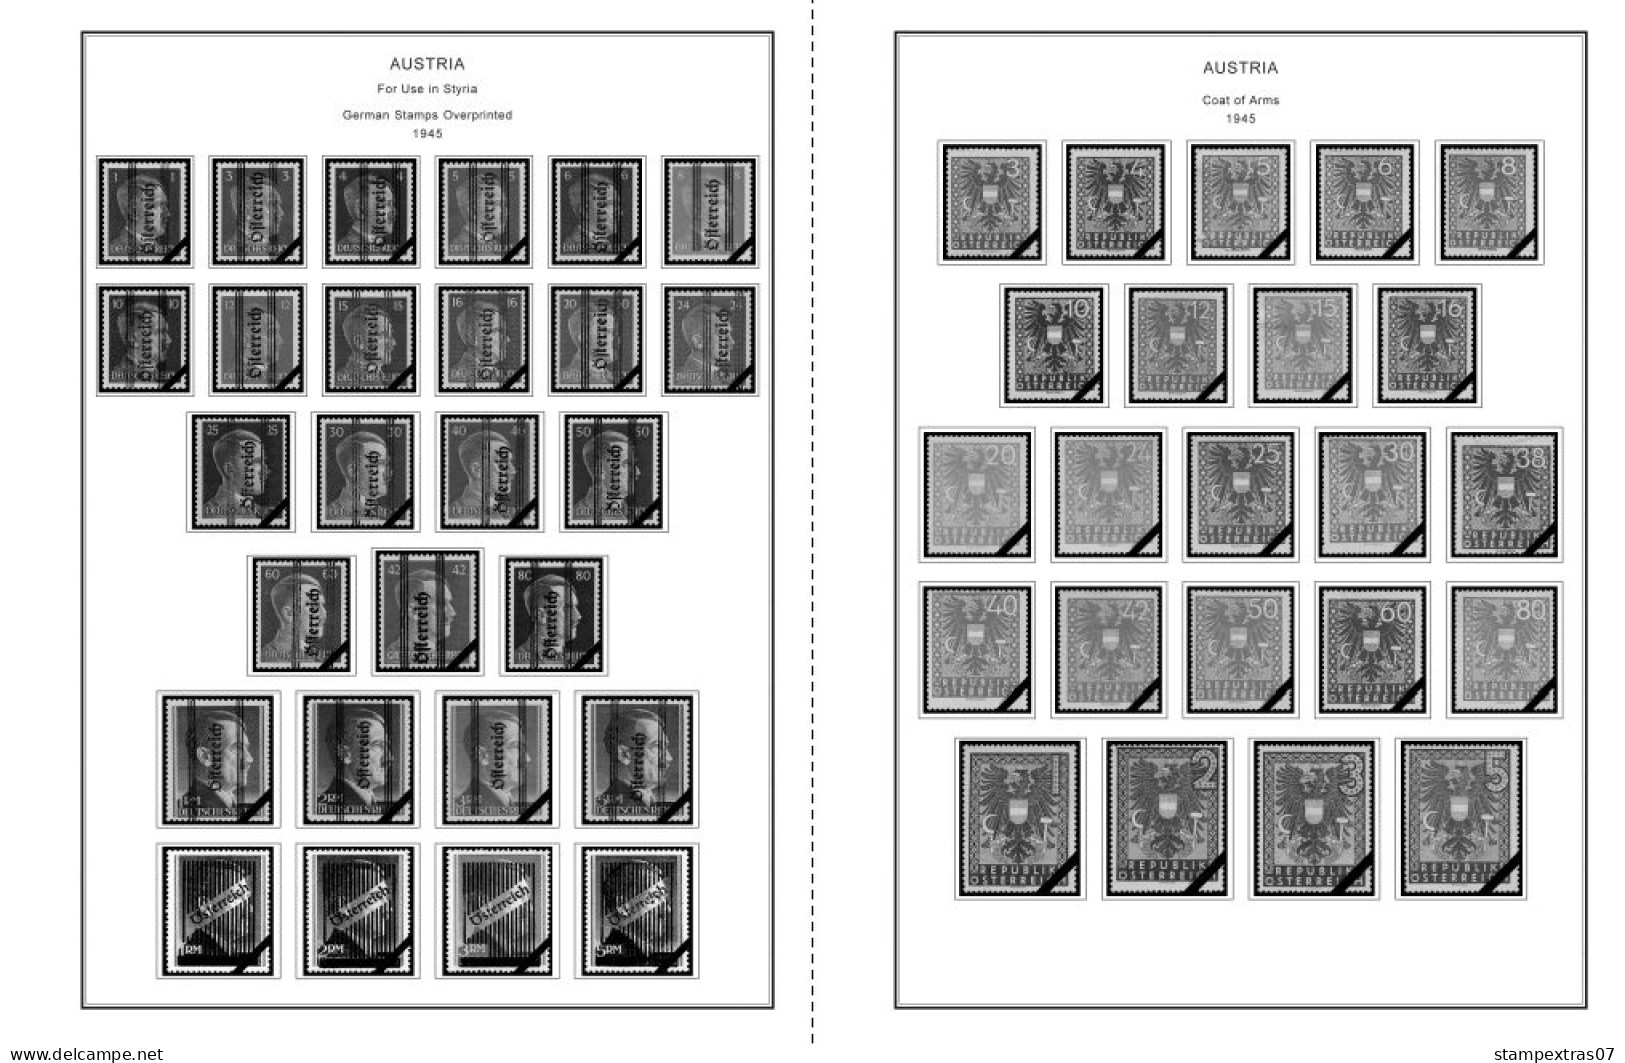 AUSTRIA 1850-2010 + 2011-2020 STAMP ALBUM PAGES (417 b&w illustrated pages)